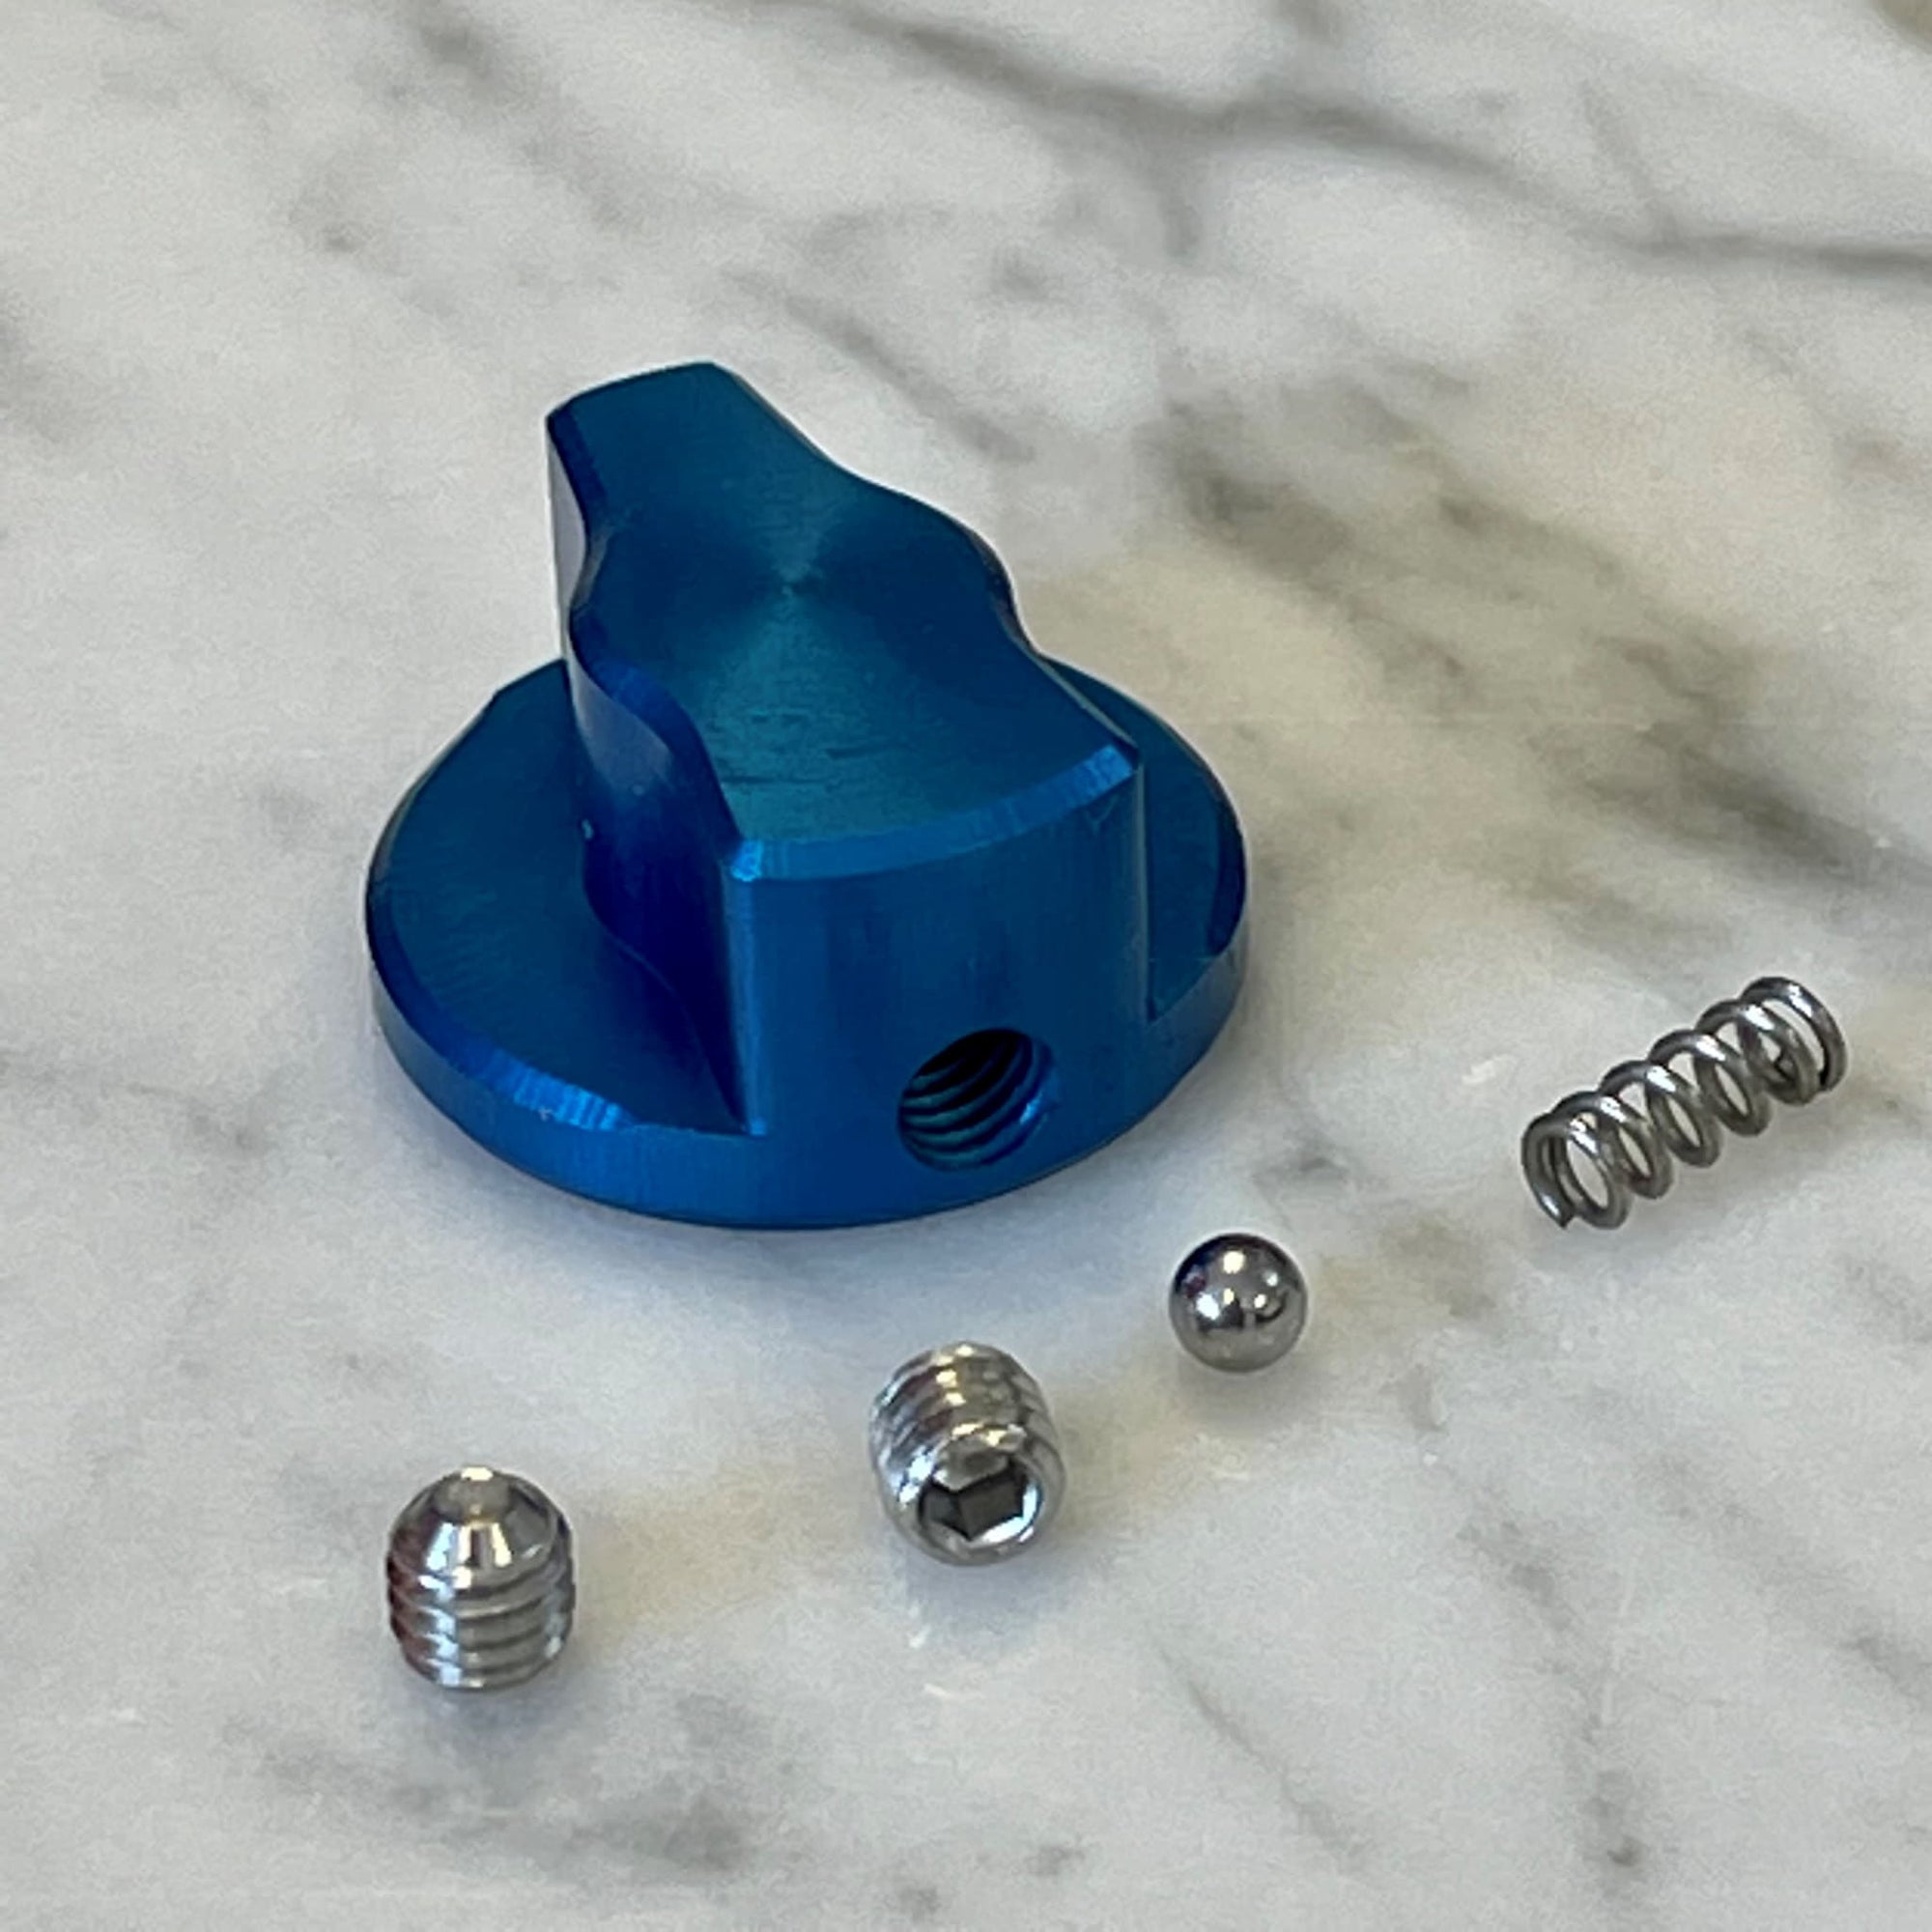 mscmotousa, Blue Adjuster Knob for RM3, Axis, and VectorMX Steering Dampers, MK0001, axis, rm3, vectormx, , Imported and distributed in North & South America by Lindeco Genuine Powersports.